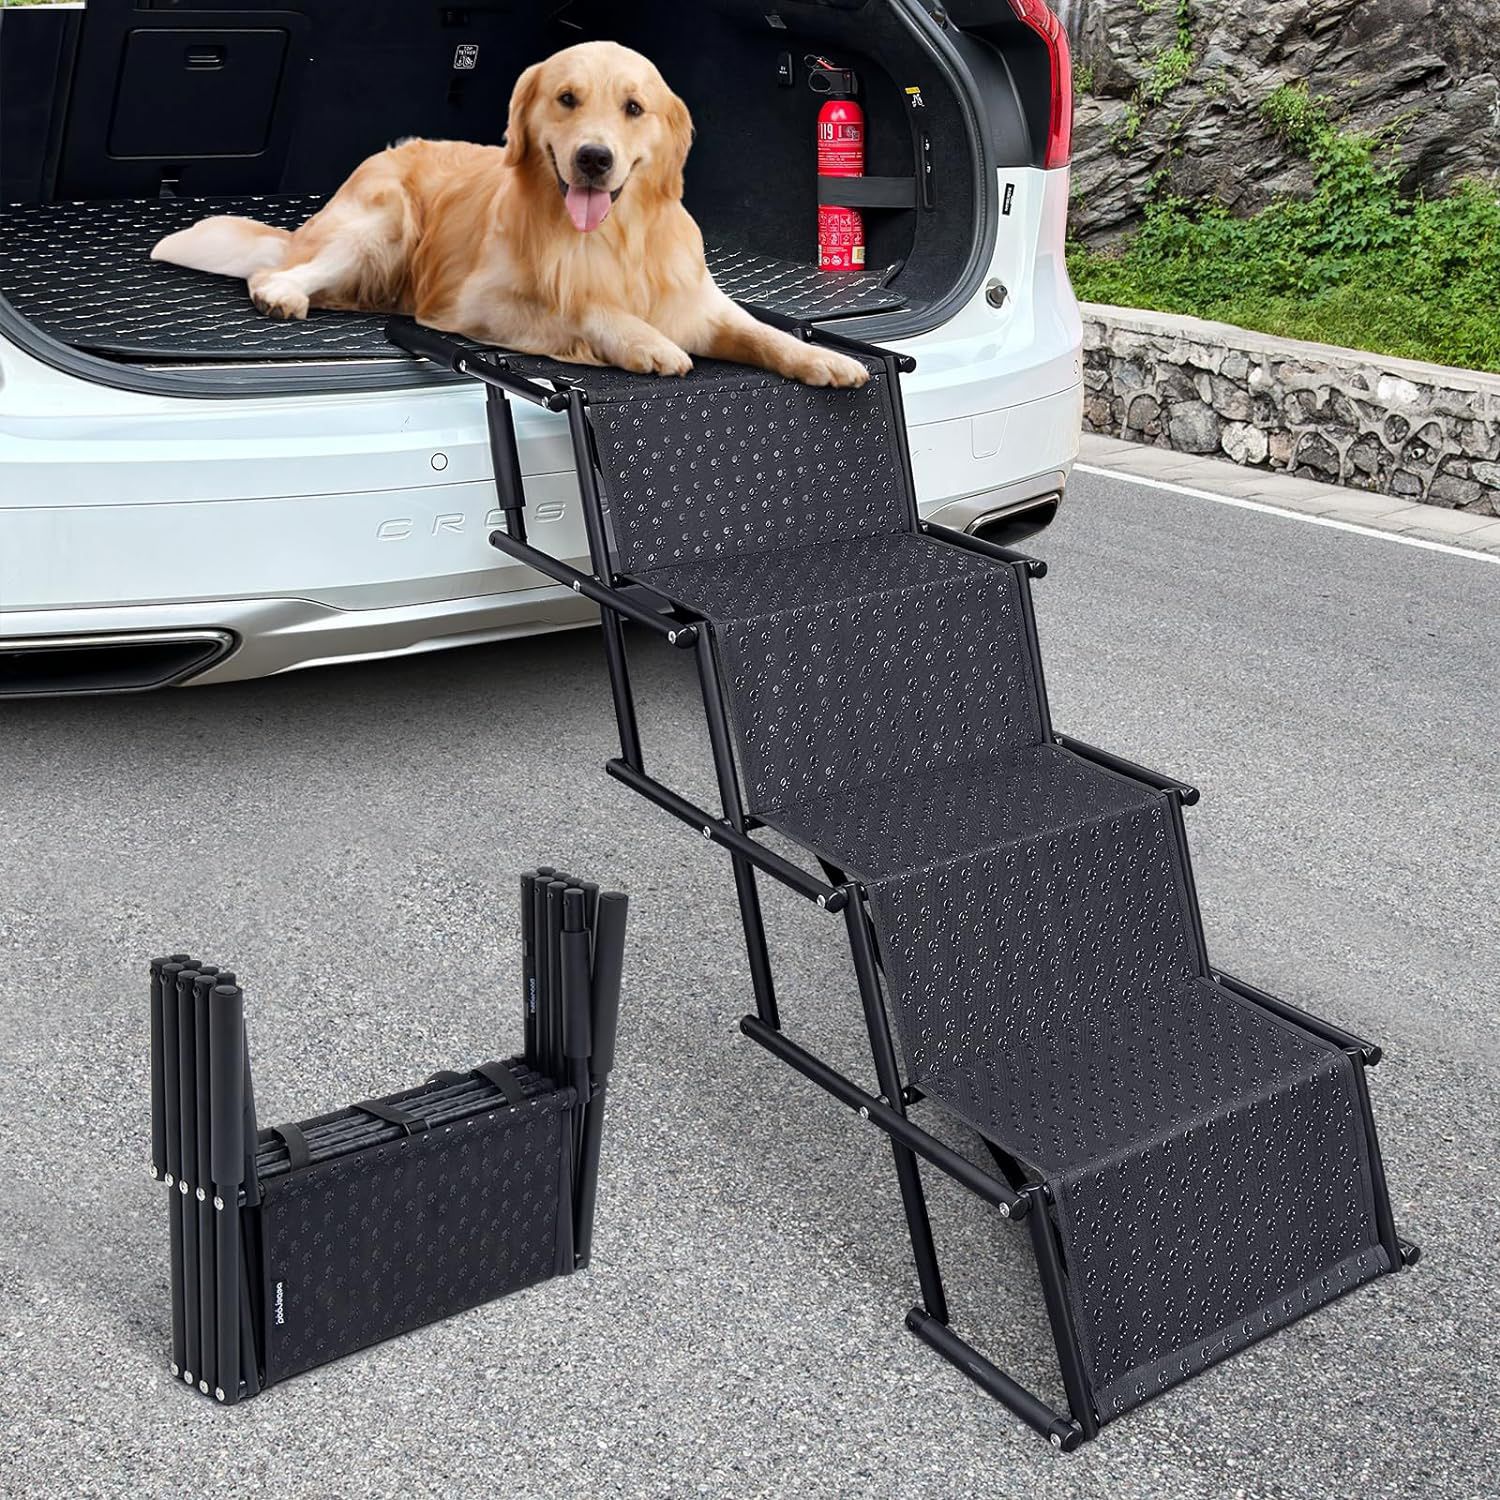 BEBEROAD Portable Folding Pet Stair & Ramp for Large Dogs up to 154lbs, Non-Slip Surface, Ideal for Cars, SUVs, High Beds, and Trucks (4 Steps Black)